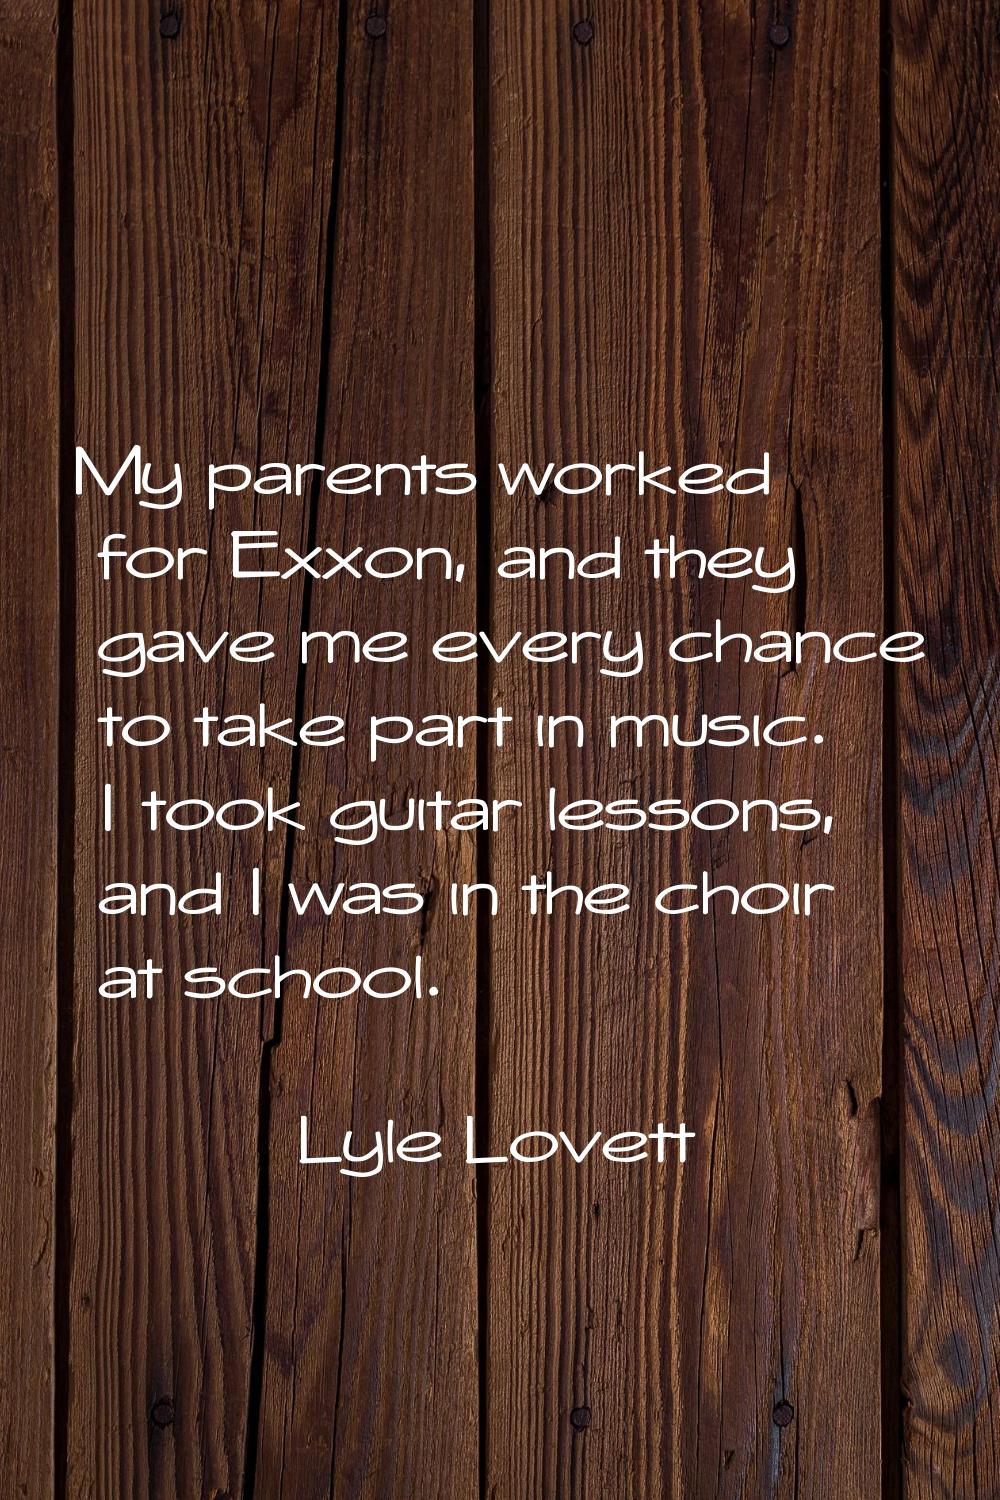 My parents worked for Exxon, and they gave me every chance to take part in music. I took guitar les